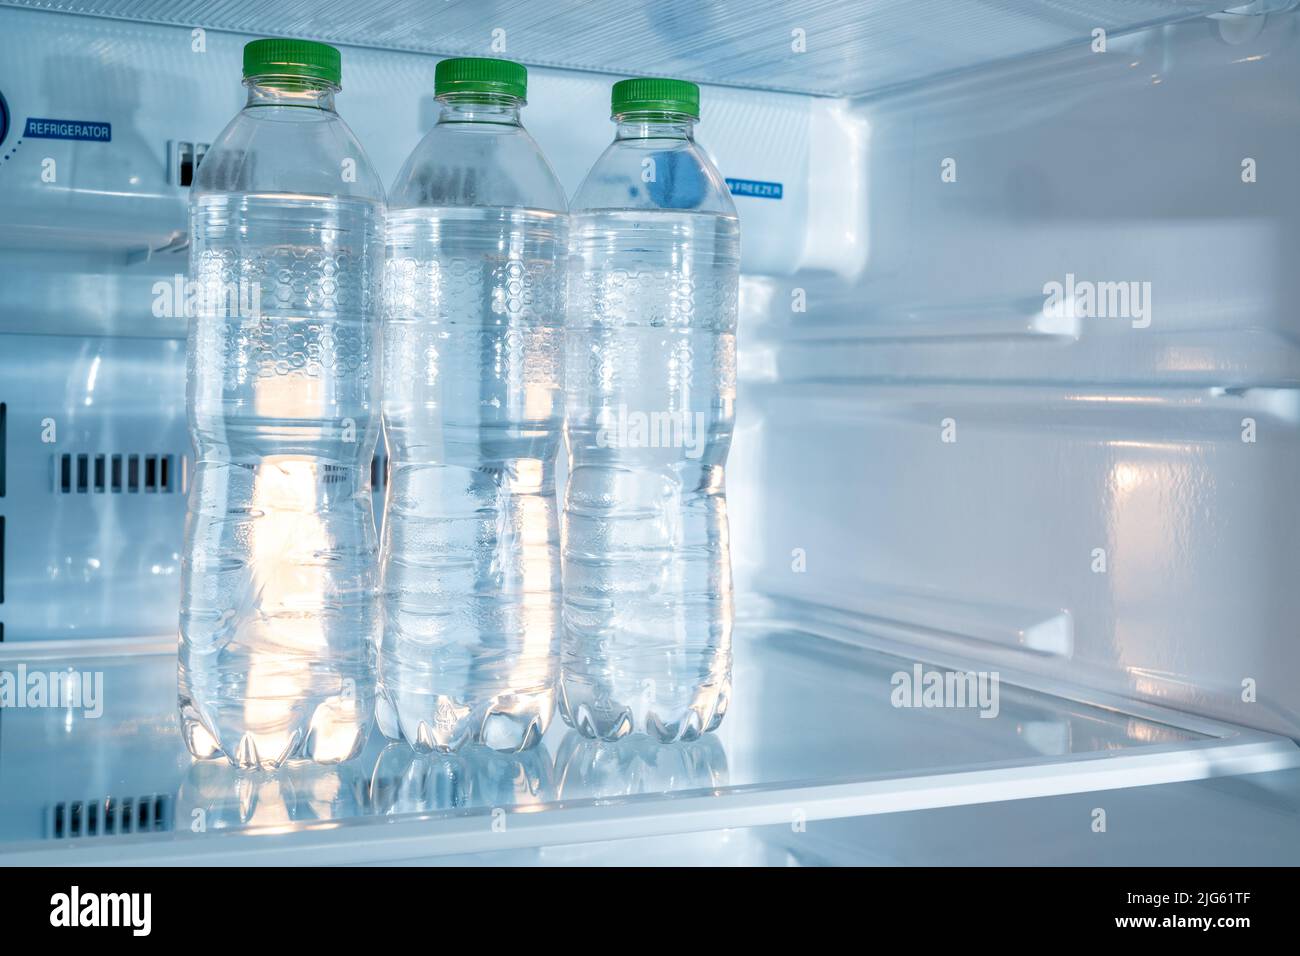 Cold bottles of clean drinking water in a white refrigerator Stock Photo